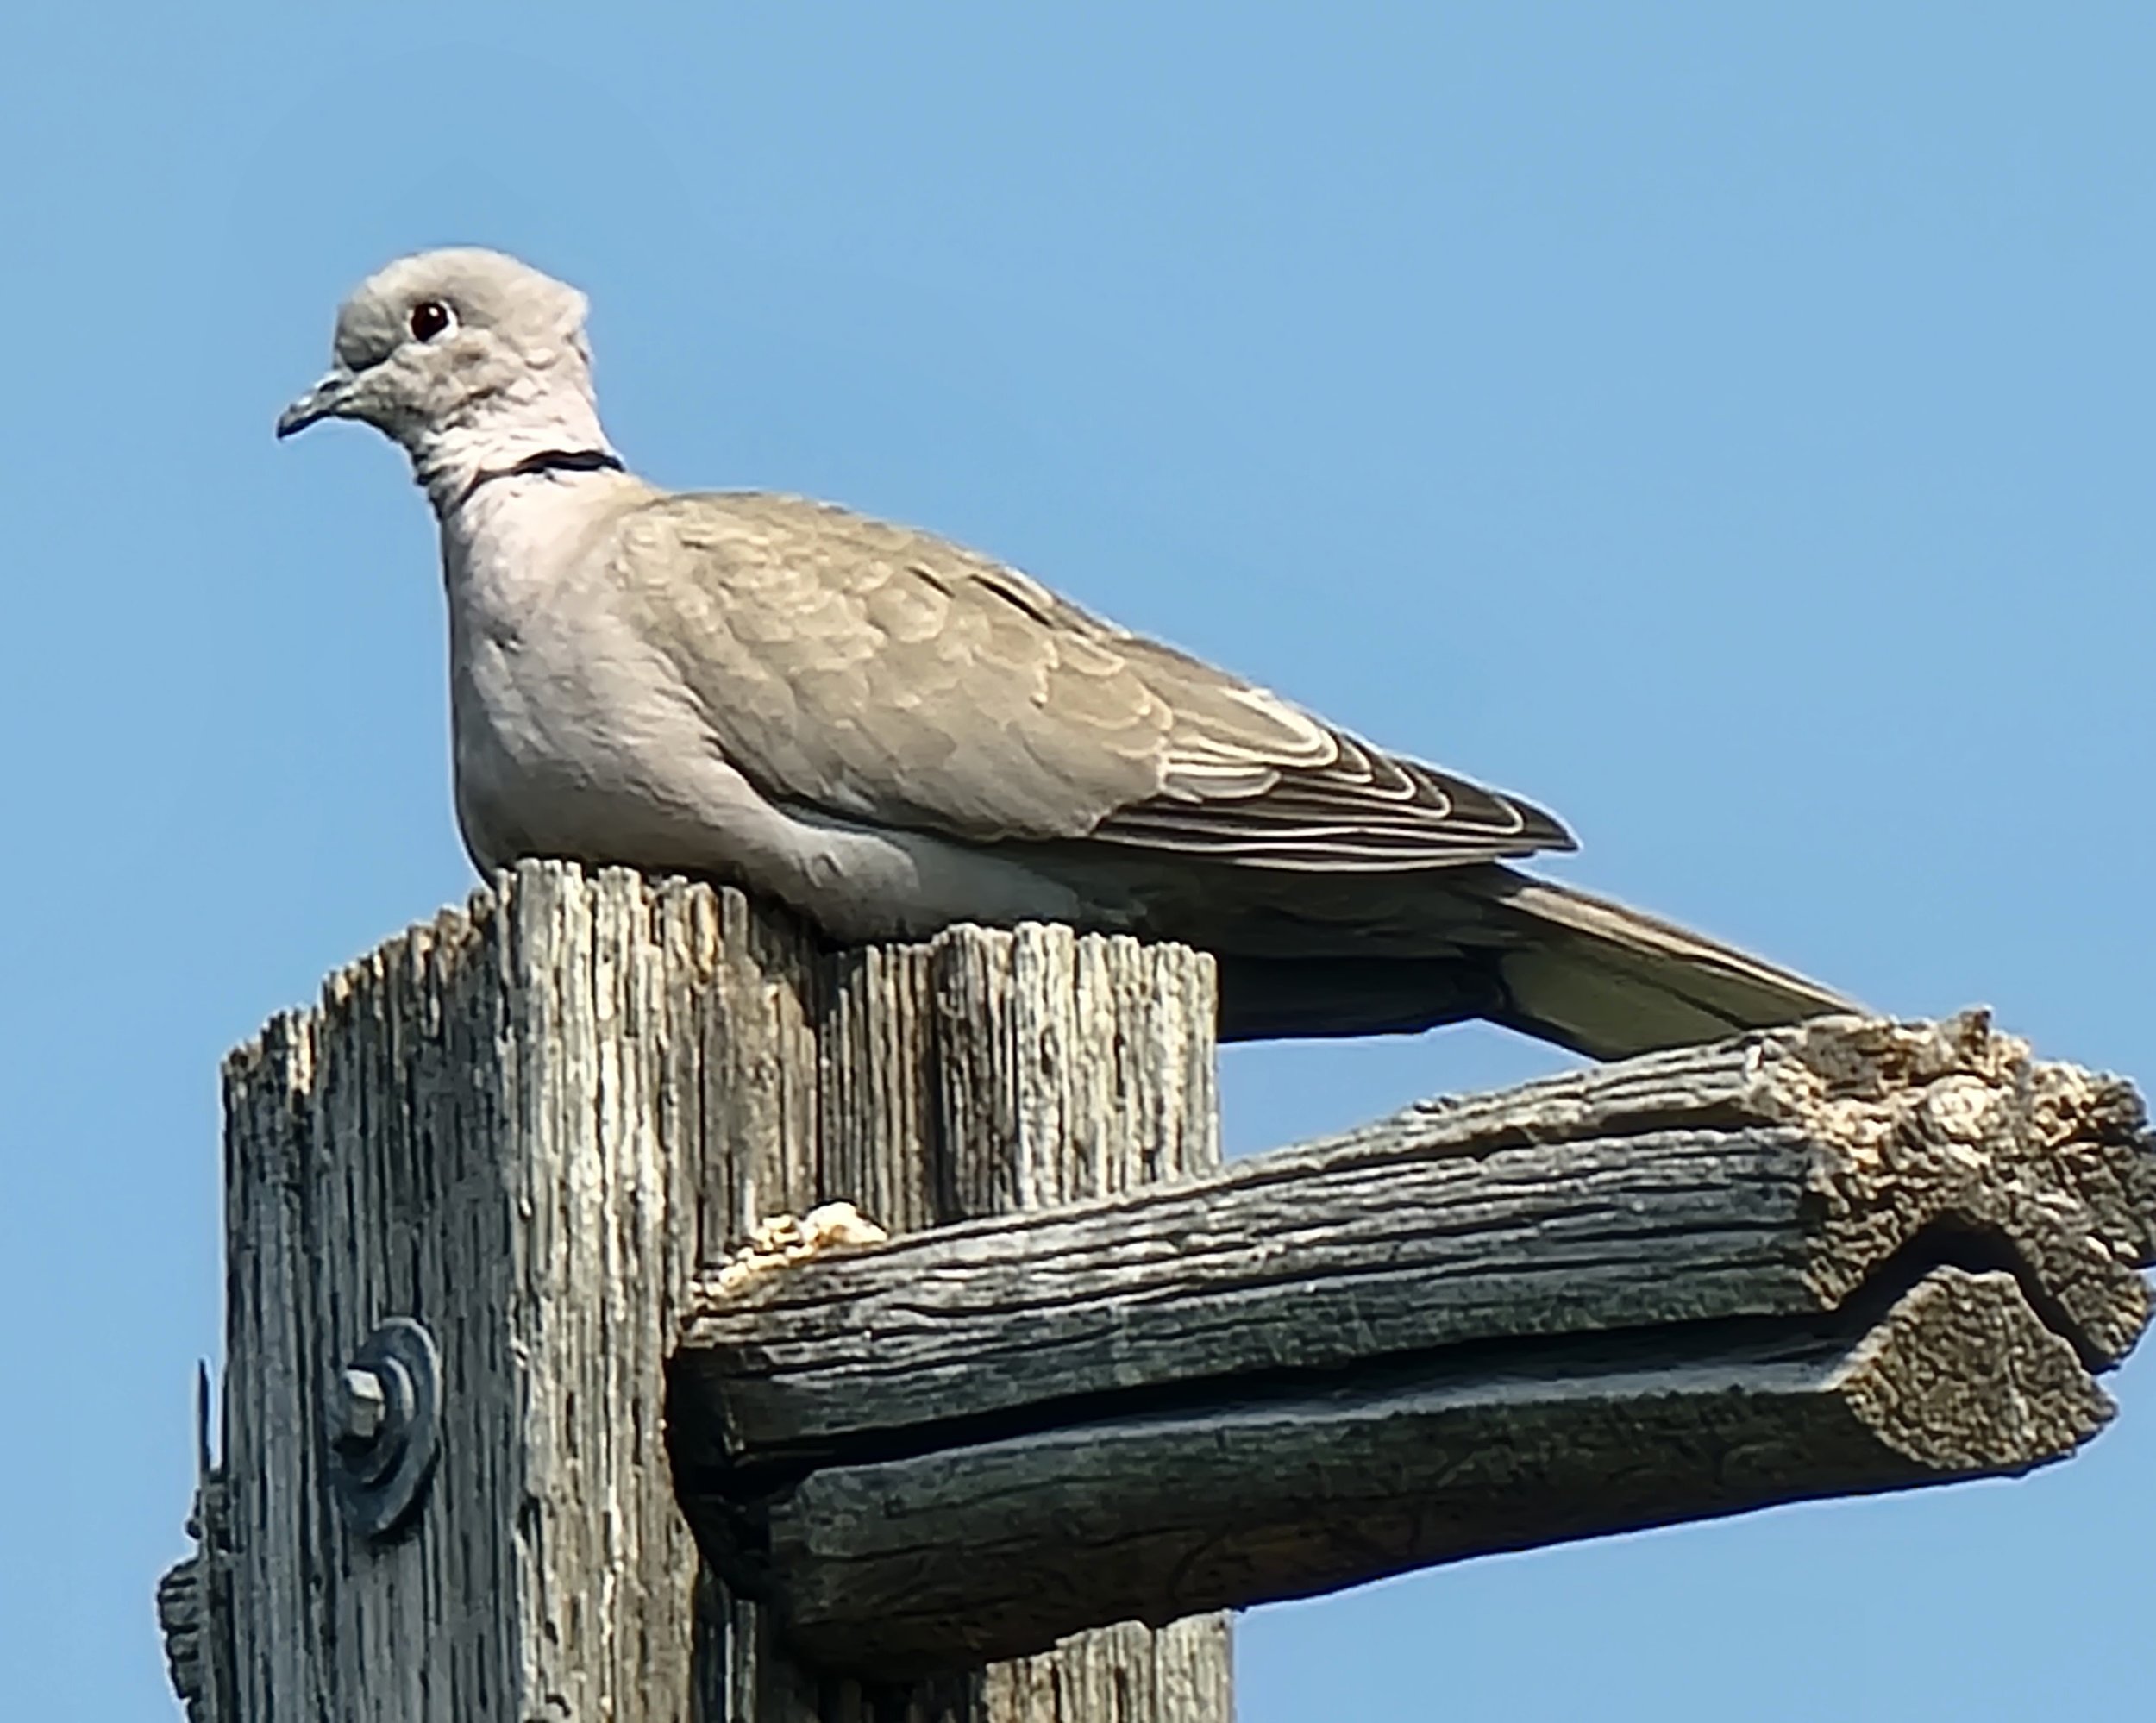 Eurasian Collared-Dove. This is a chonky boi right here, I thought it was a hawk from a distance.